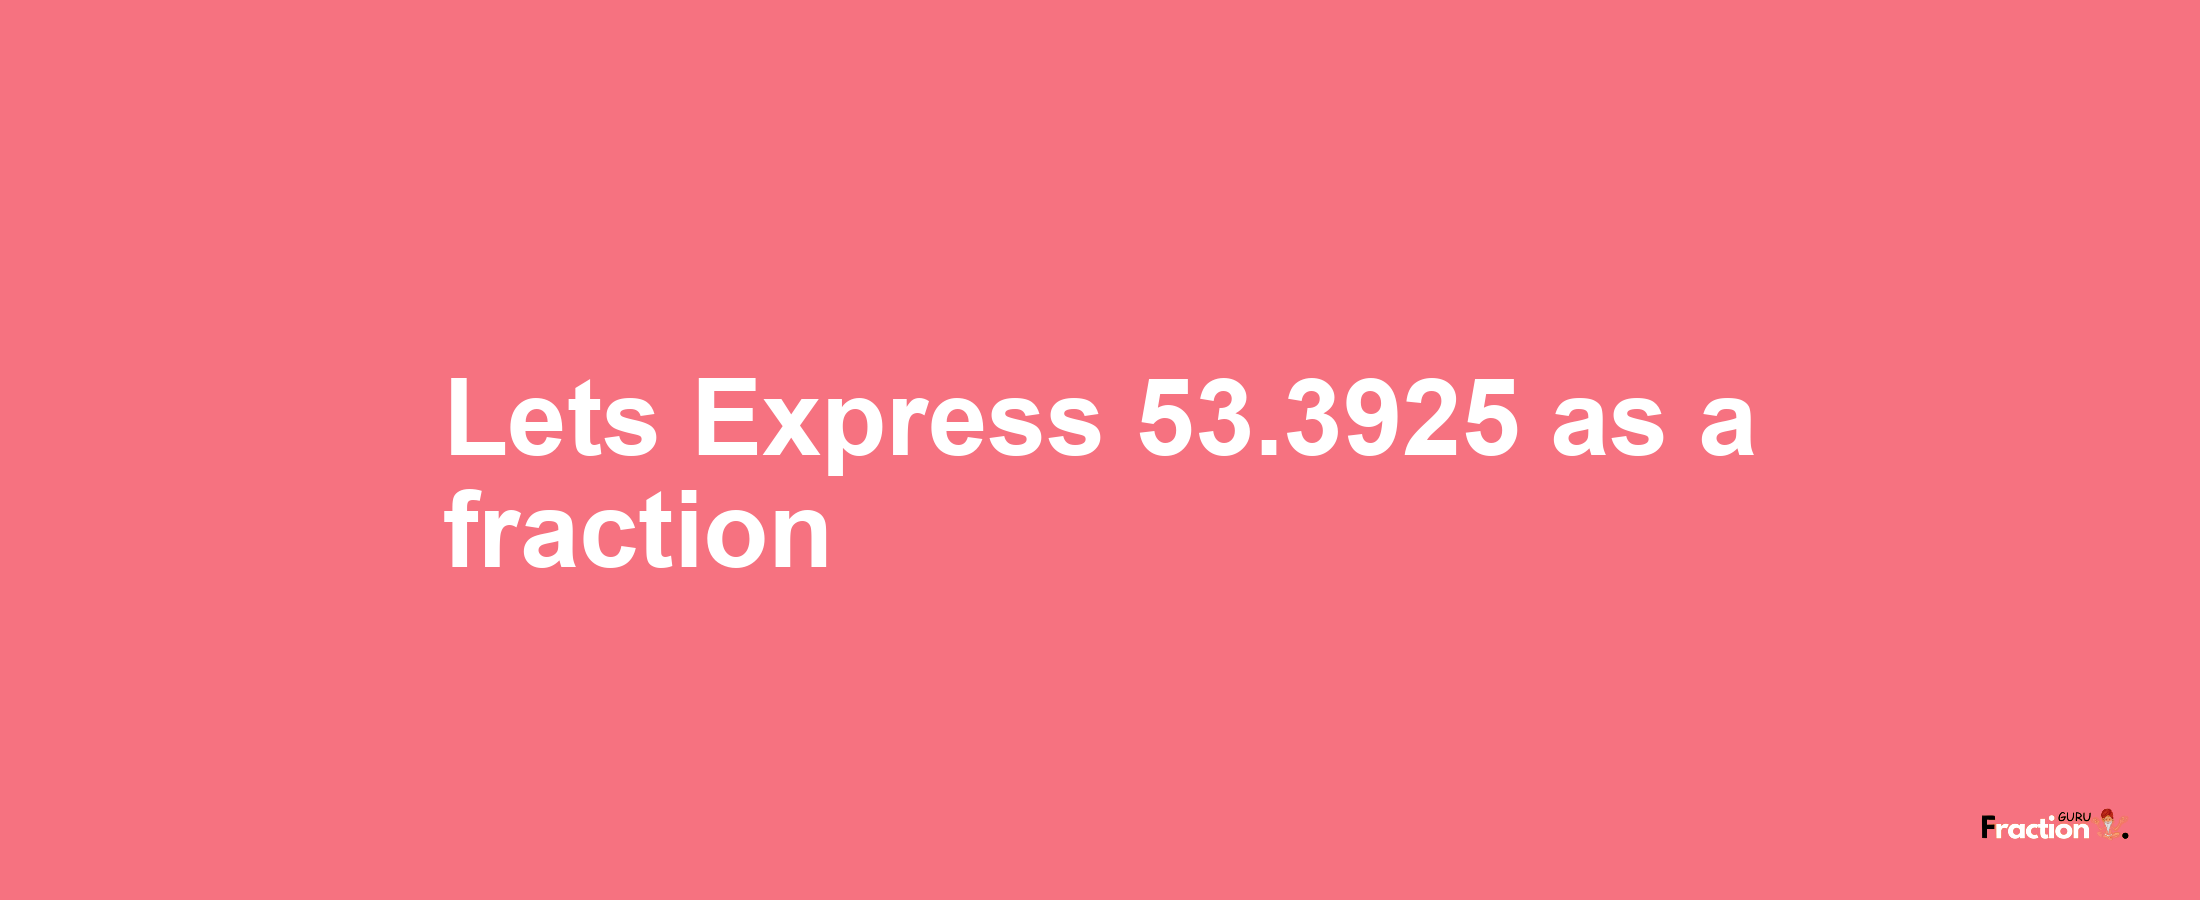 Lets Express 53.3925 as afraction